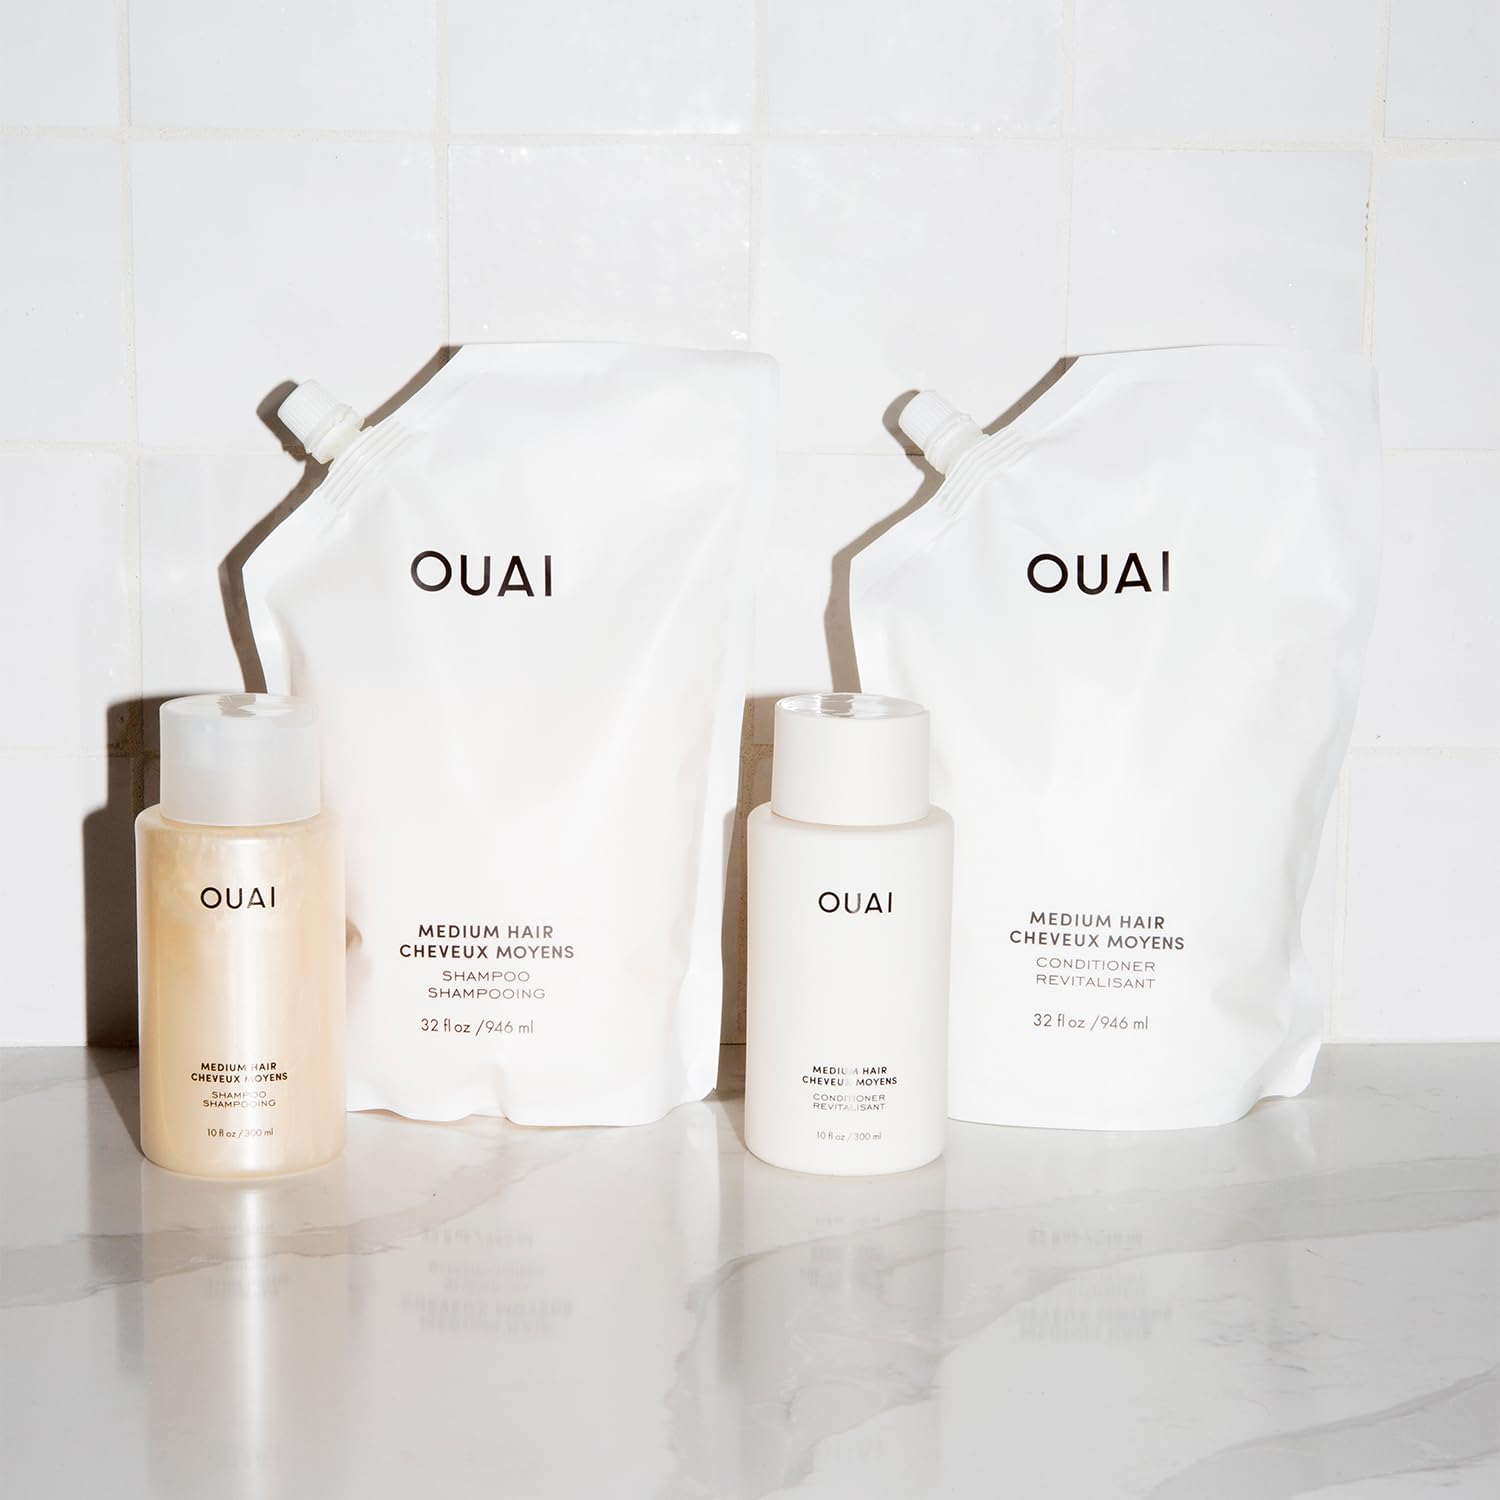 OUAI Medium Conditioner Refill - Hydrating Hair Conditioner with Coconut Oil, Babassu Oil, and Keratin - Strengthens, Repairs and Adds Shine - Paraben and Phthalate Free Hair Care Products - 32 oz : Beauty & Personal Care